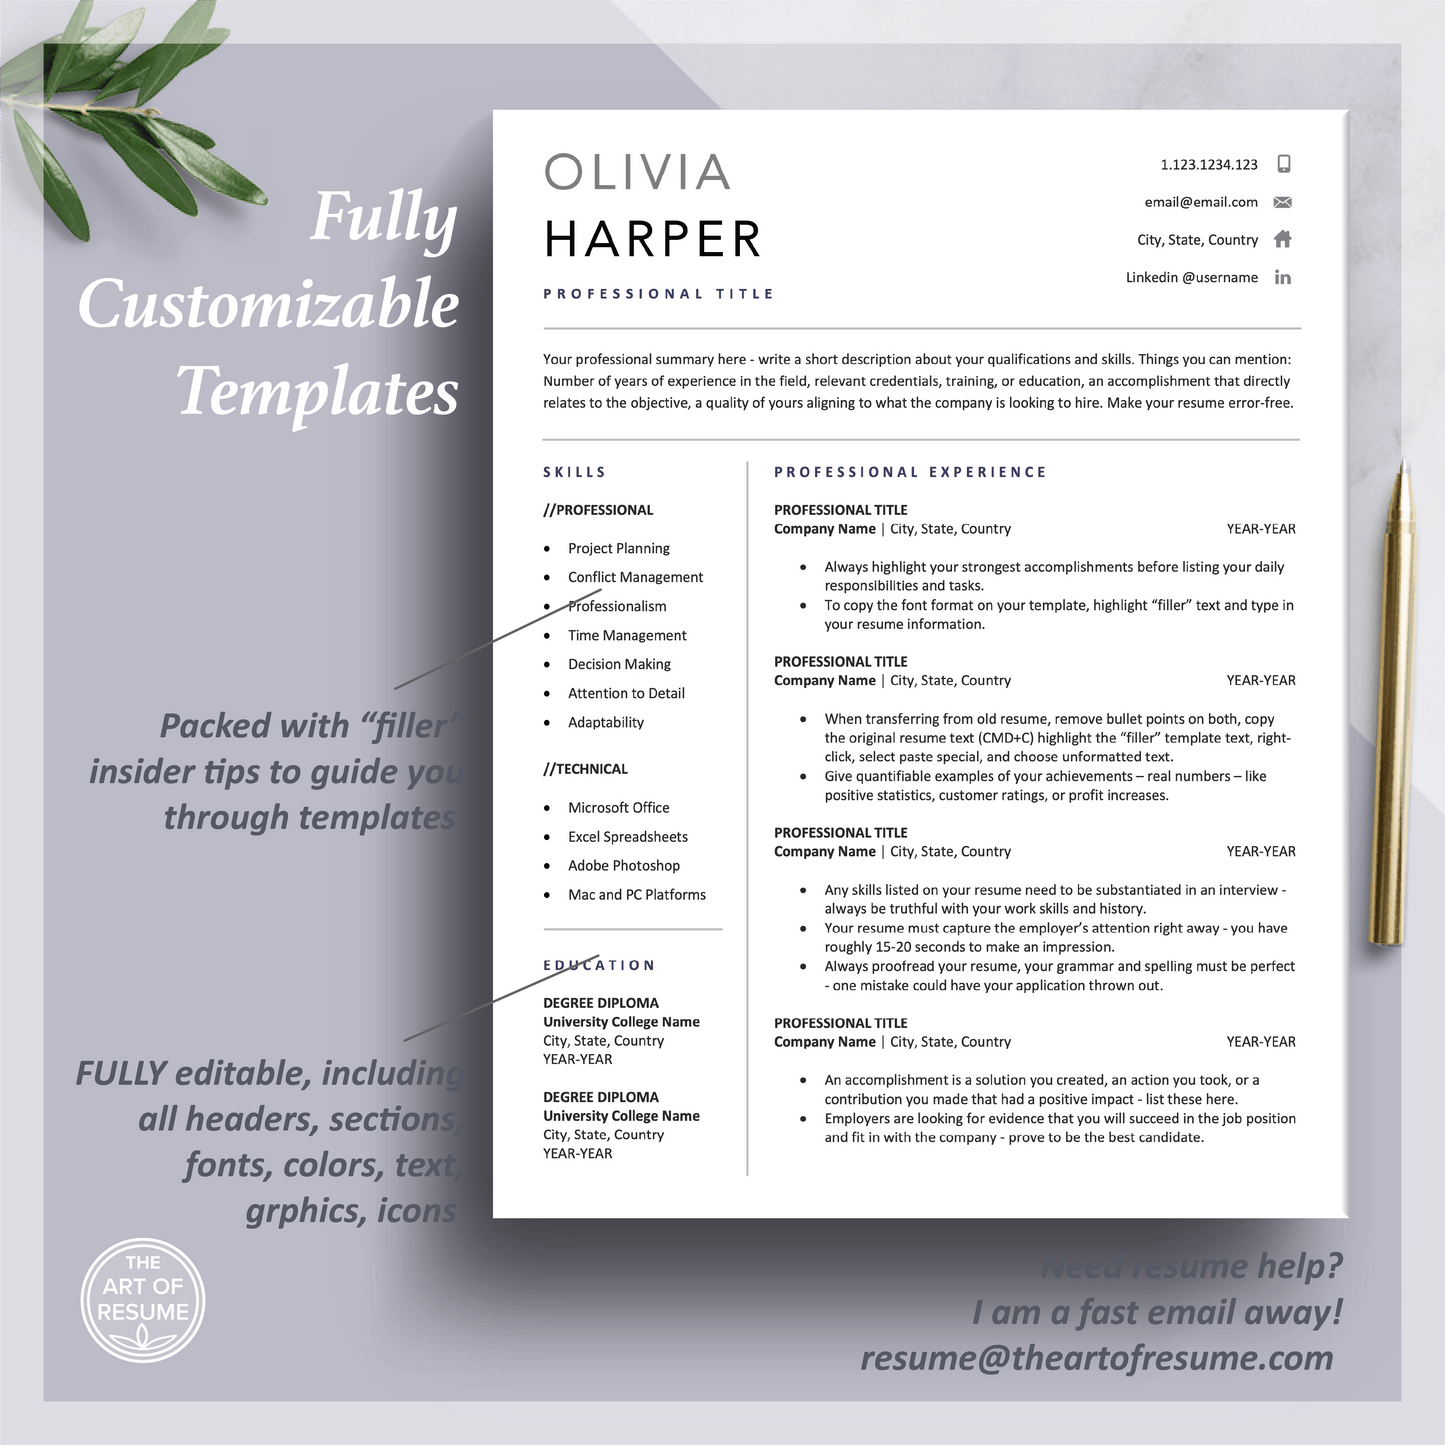 Executive Resume Template | Simple Professional CV Template | Free Cover Letter